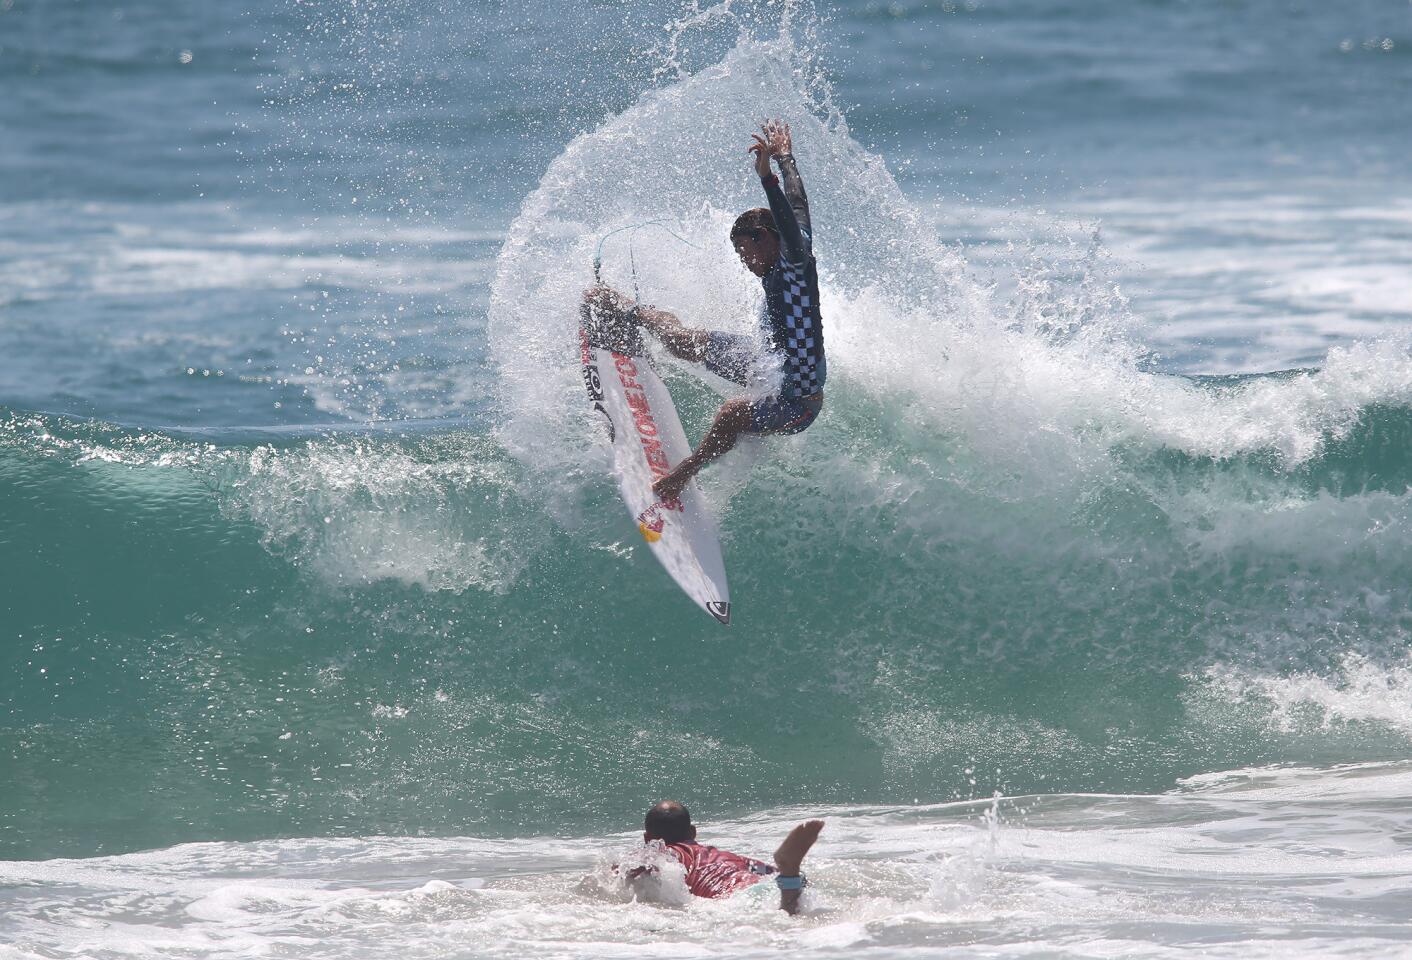 Huntington Beach's Kanoa Igarashi goes hard off the top as he surfs his way to the final against Jadson Andre during the Men's US Open semi-final on Sunday.